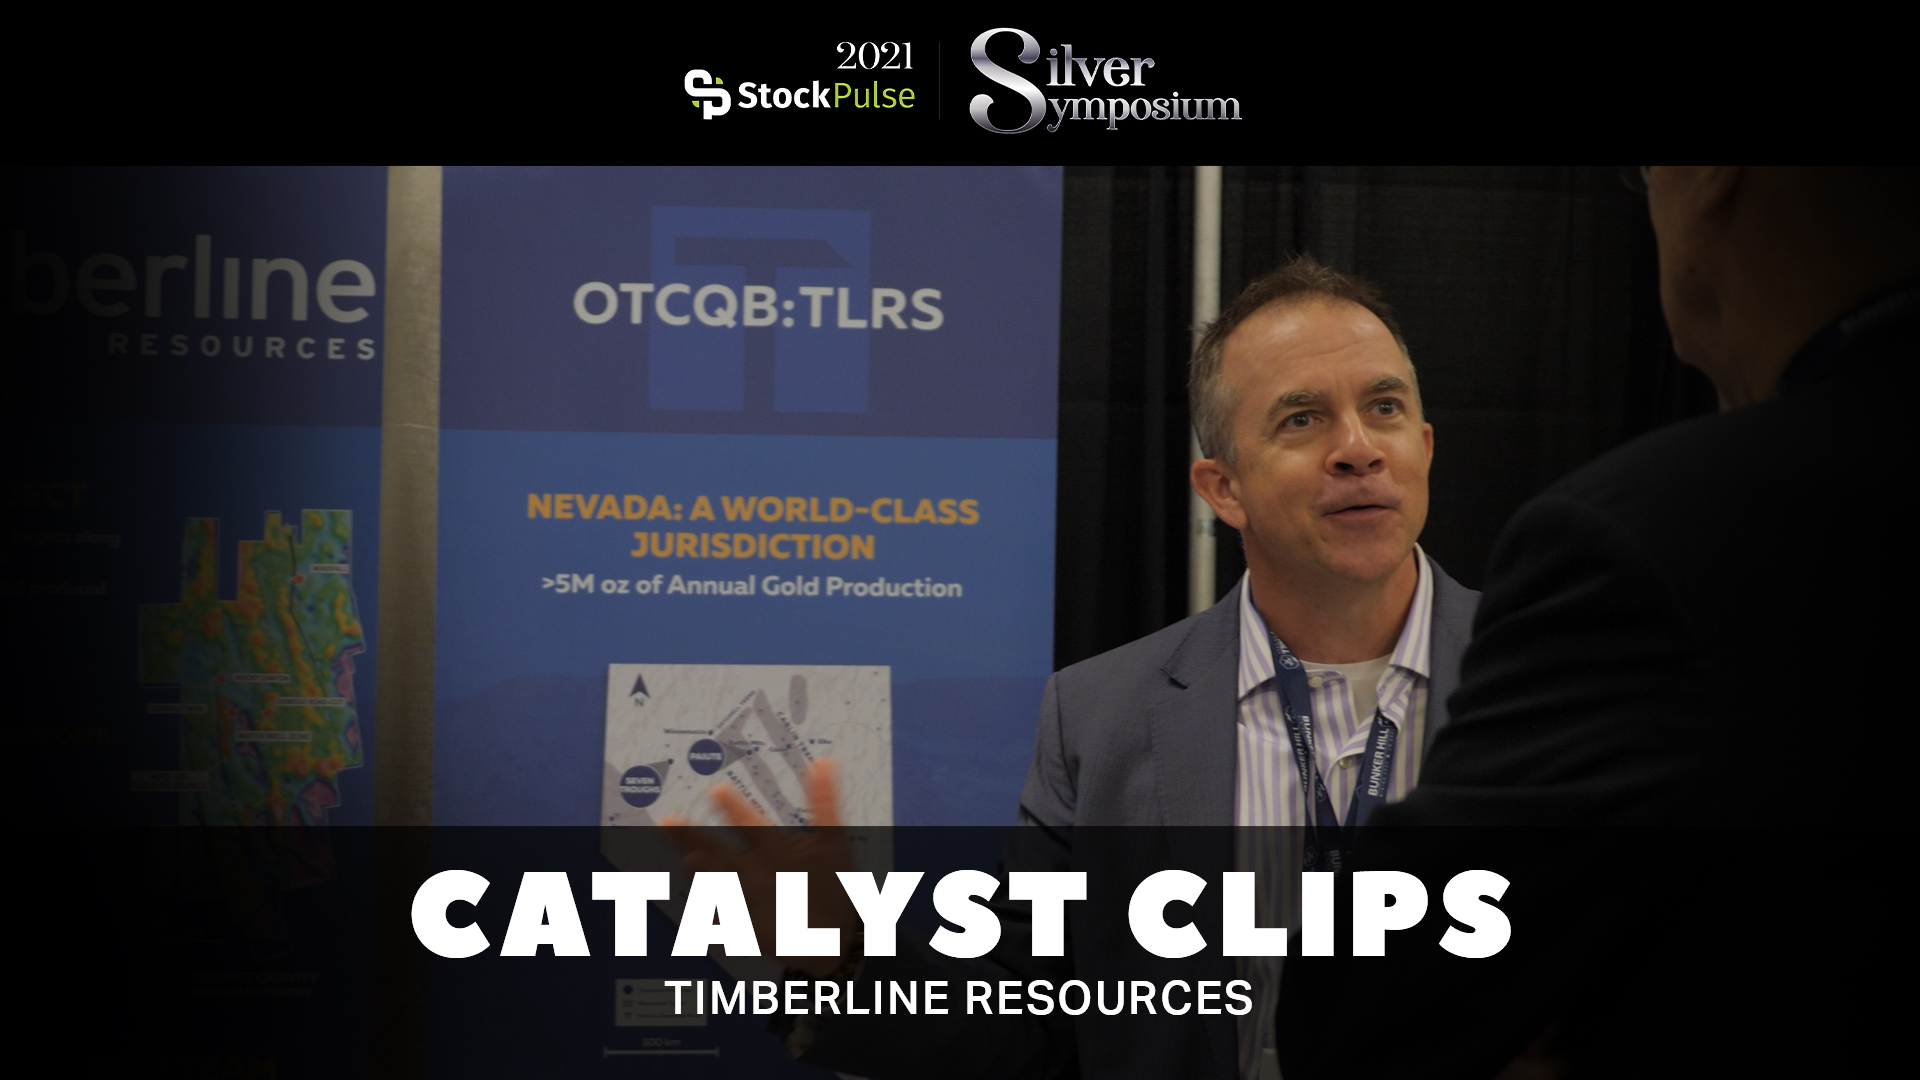 2021 StockPulse Silver Symposium Catalyst Clips | Patrick Highsmith of Timberline Resources